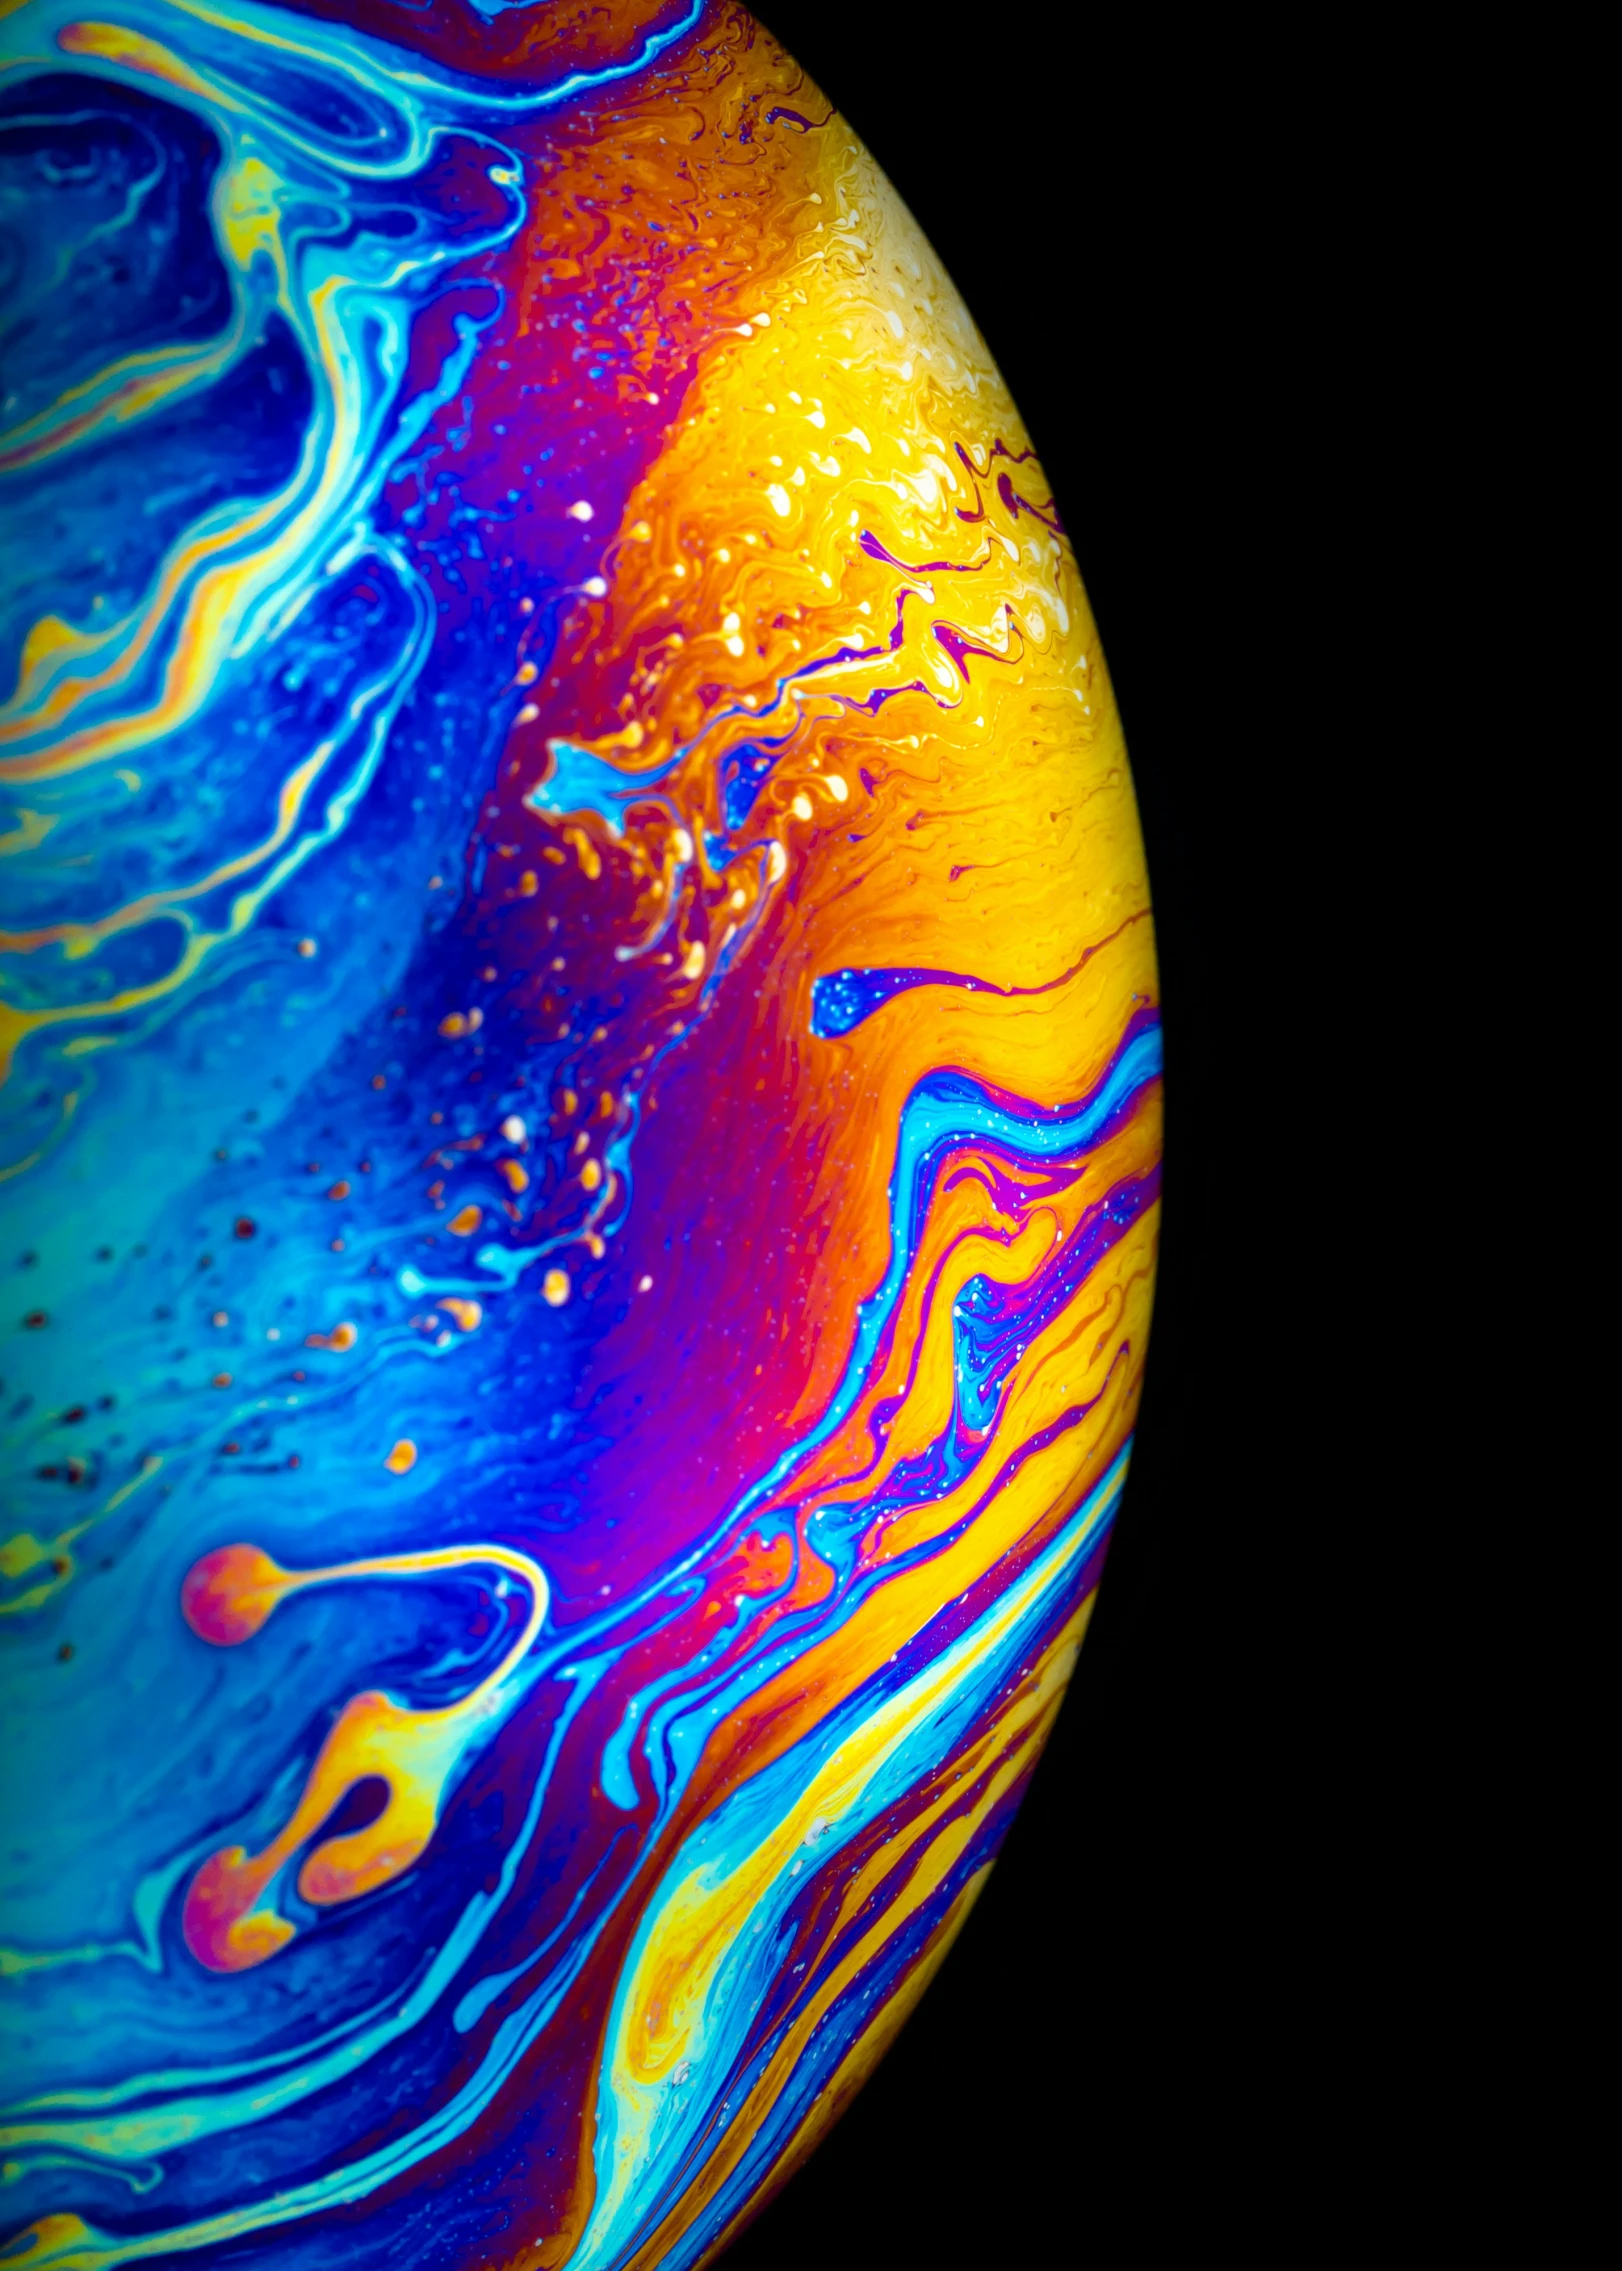 colorful, swirling pattern on a black background